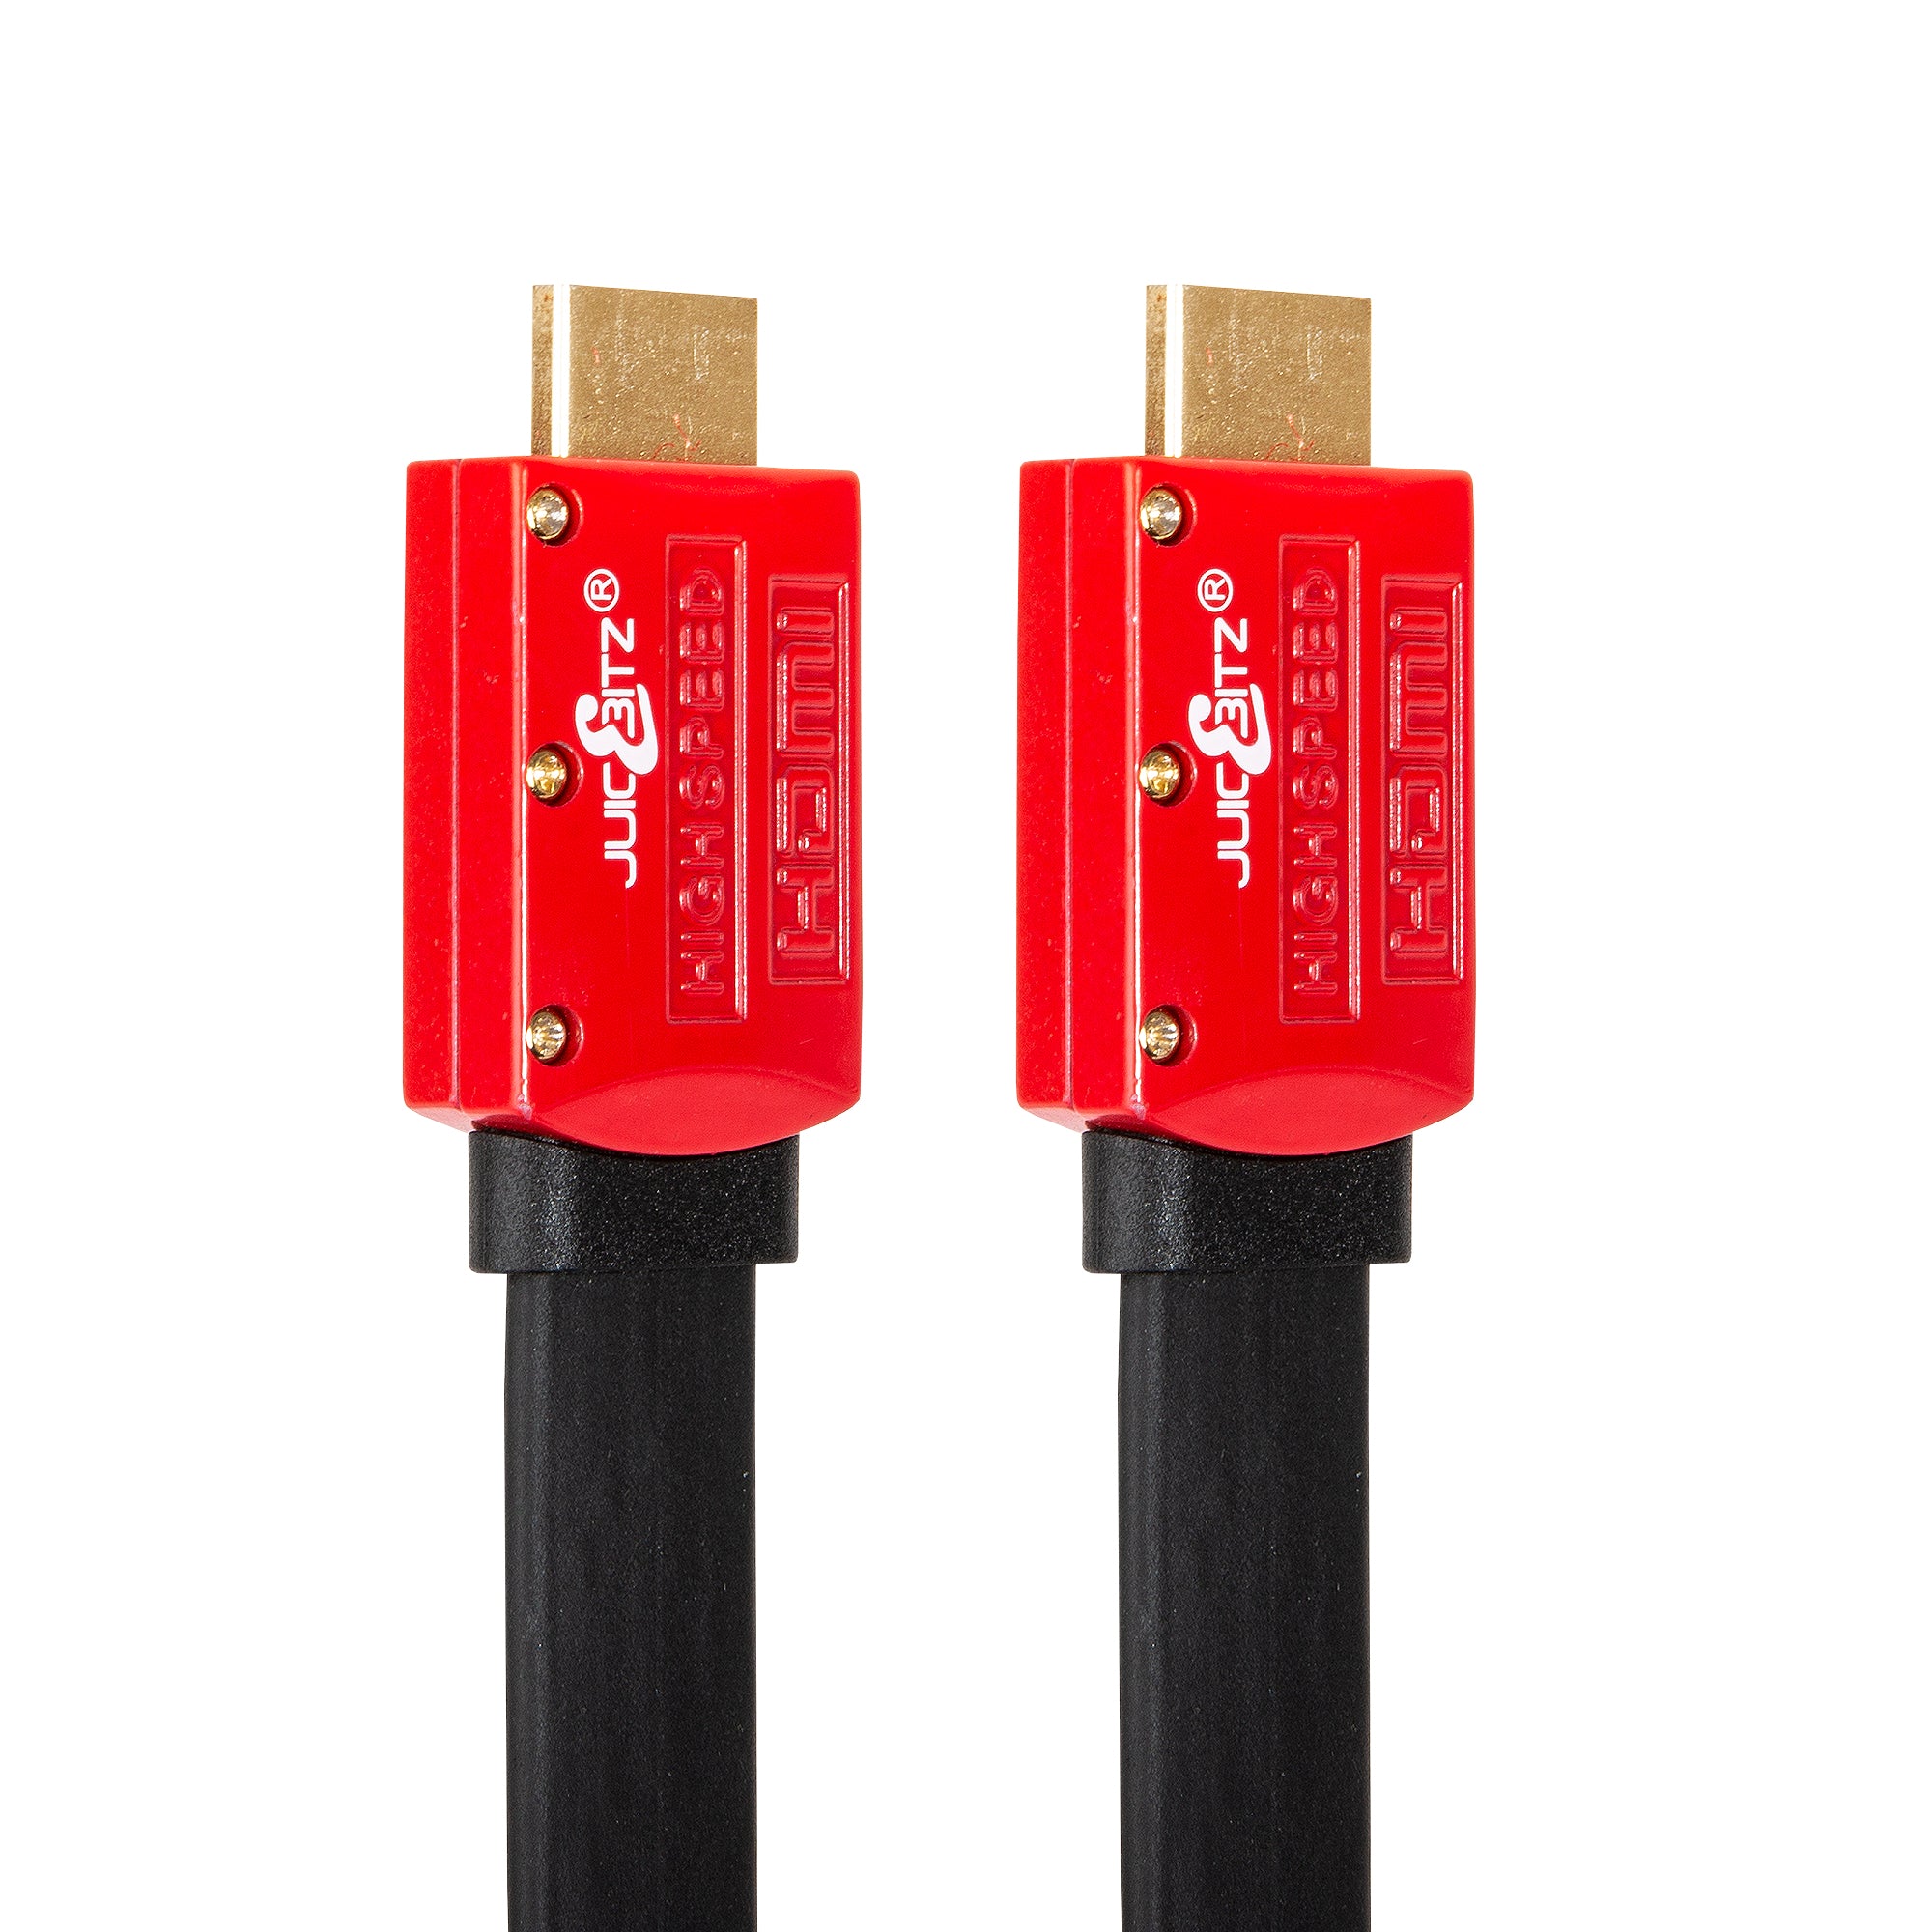 ZILR Hyper-Thin High-Speed Micro-HDMI to HDMI Cable with Ethernet (17.7)